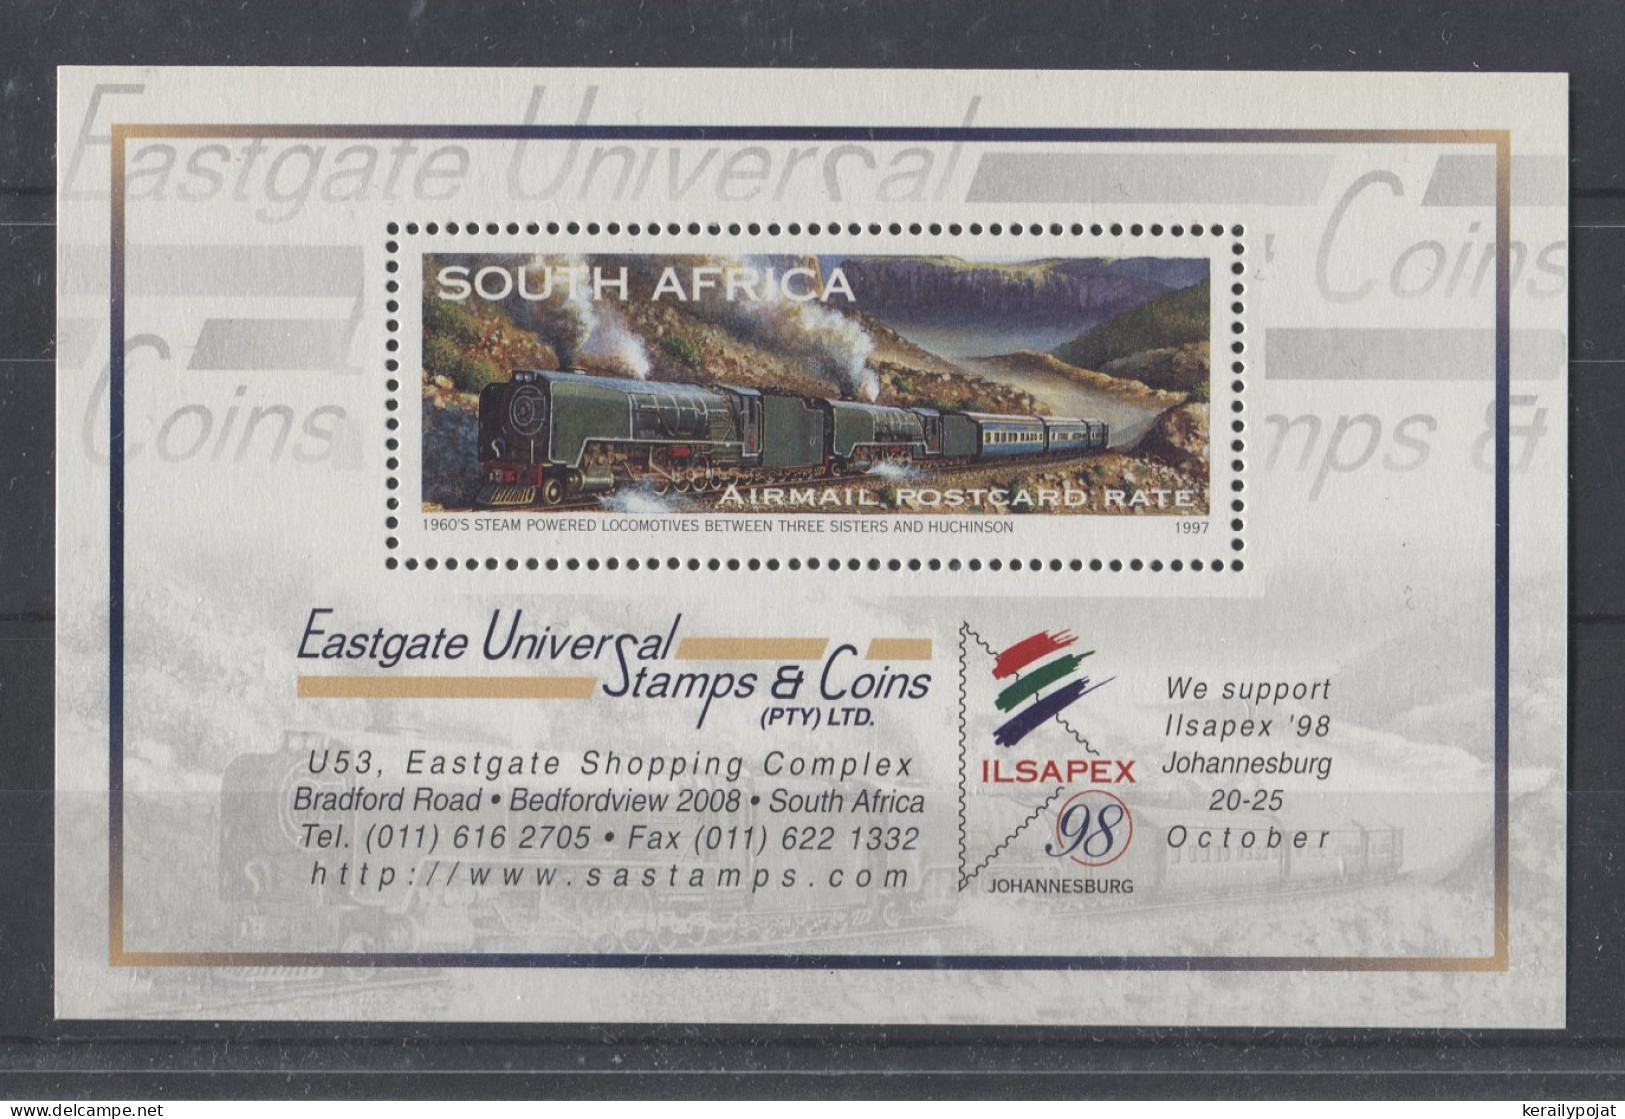 South Africa - 1997 Eastgate Universal Stamps & Coins Block MNH__(TH-11618) - Blocks & Sheetlets